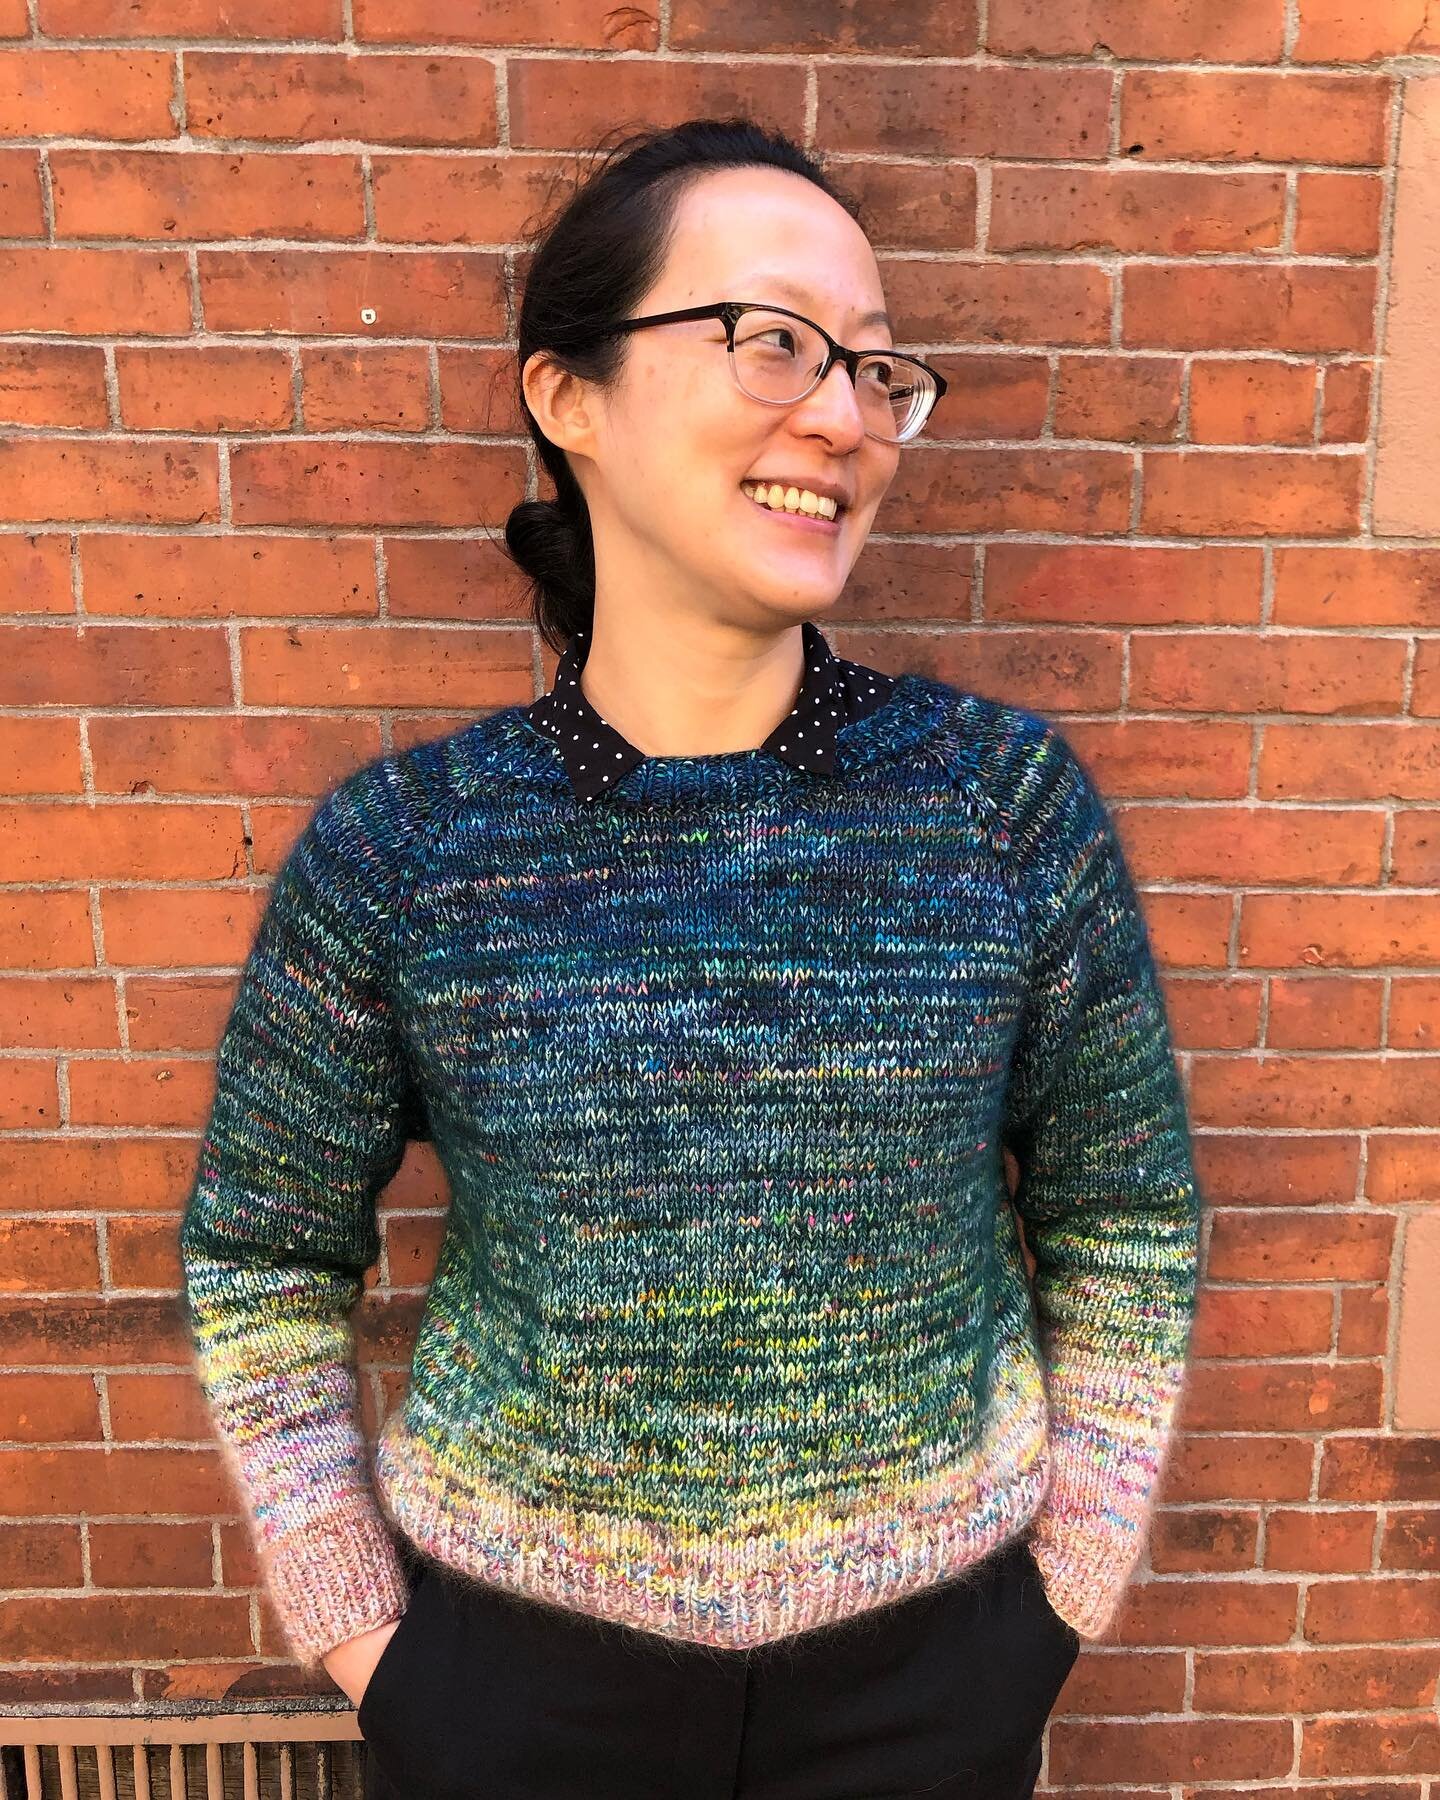 This is a sweater that I knit in the summer! I had: a pile of yarn leftovers, the new Beyonc&eacute; album on repeat, and Covid. 
I sort of organized my scrap yarn into a green ombr&eacute; when I started, and improvised from there. It is an extra fu